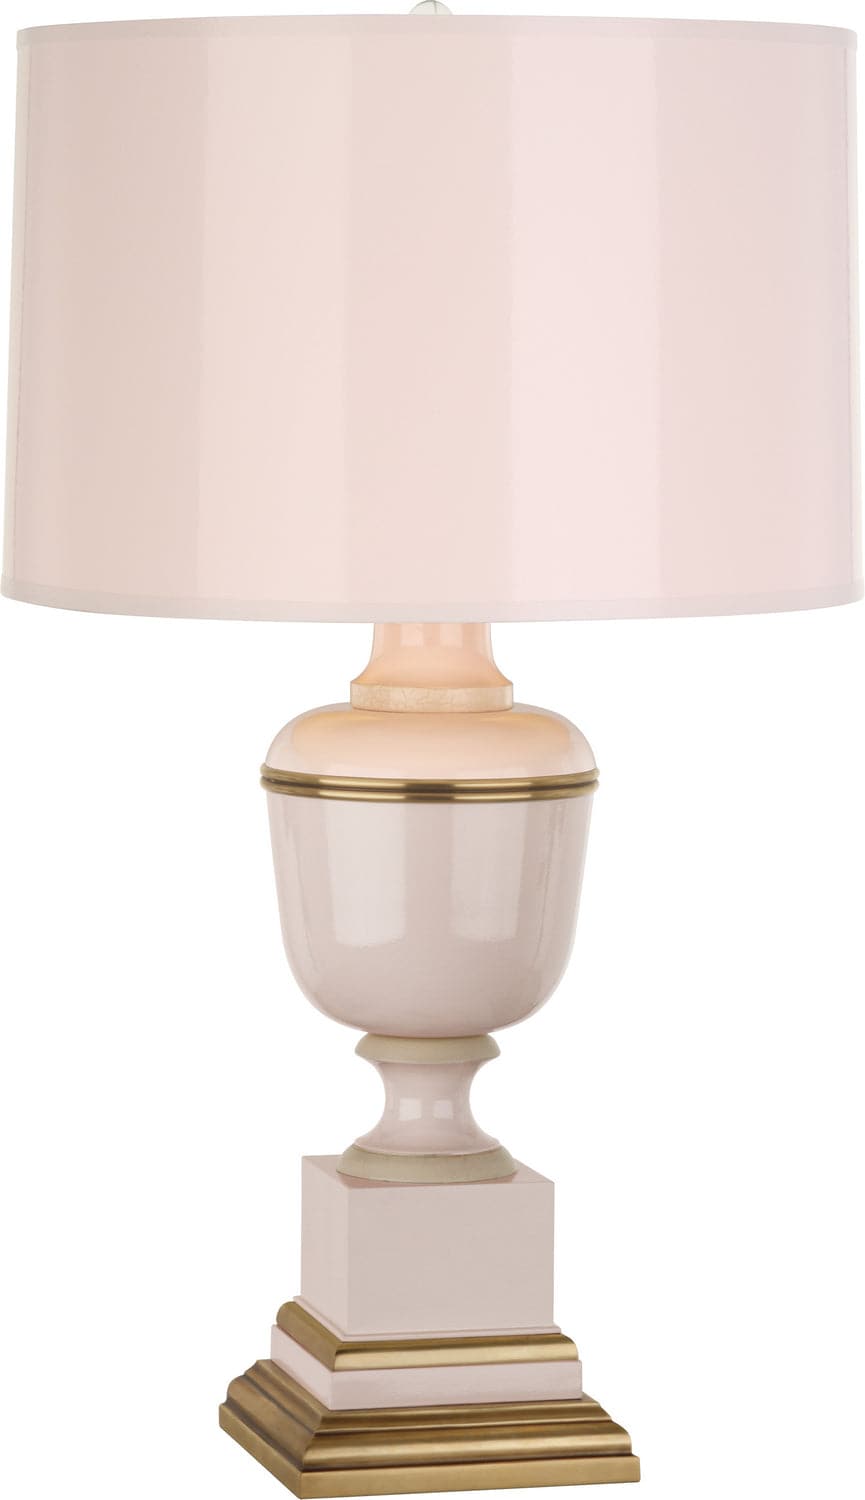 Robert Abbey - 2605 - One Light Accent Lamp - Annika - Blush Lacquered Paint w/Natural Brass and Ivory Crackle